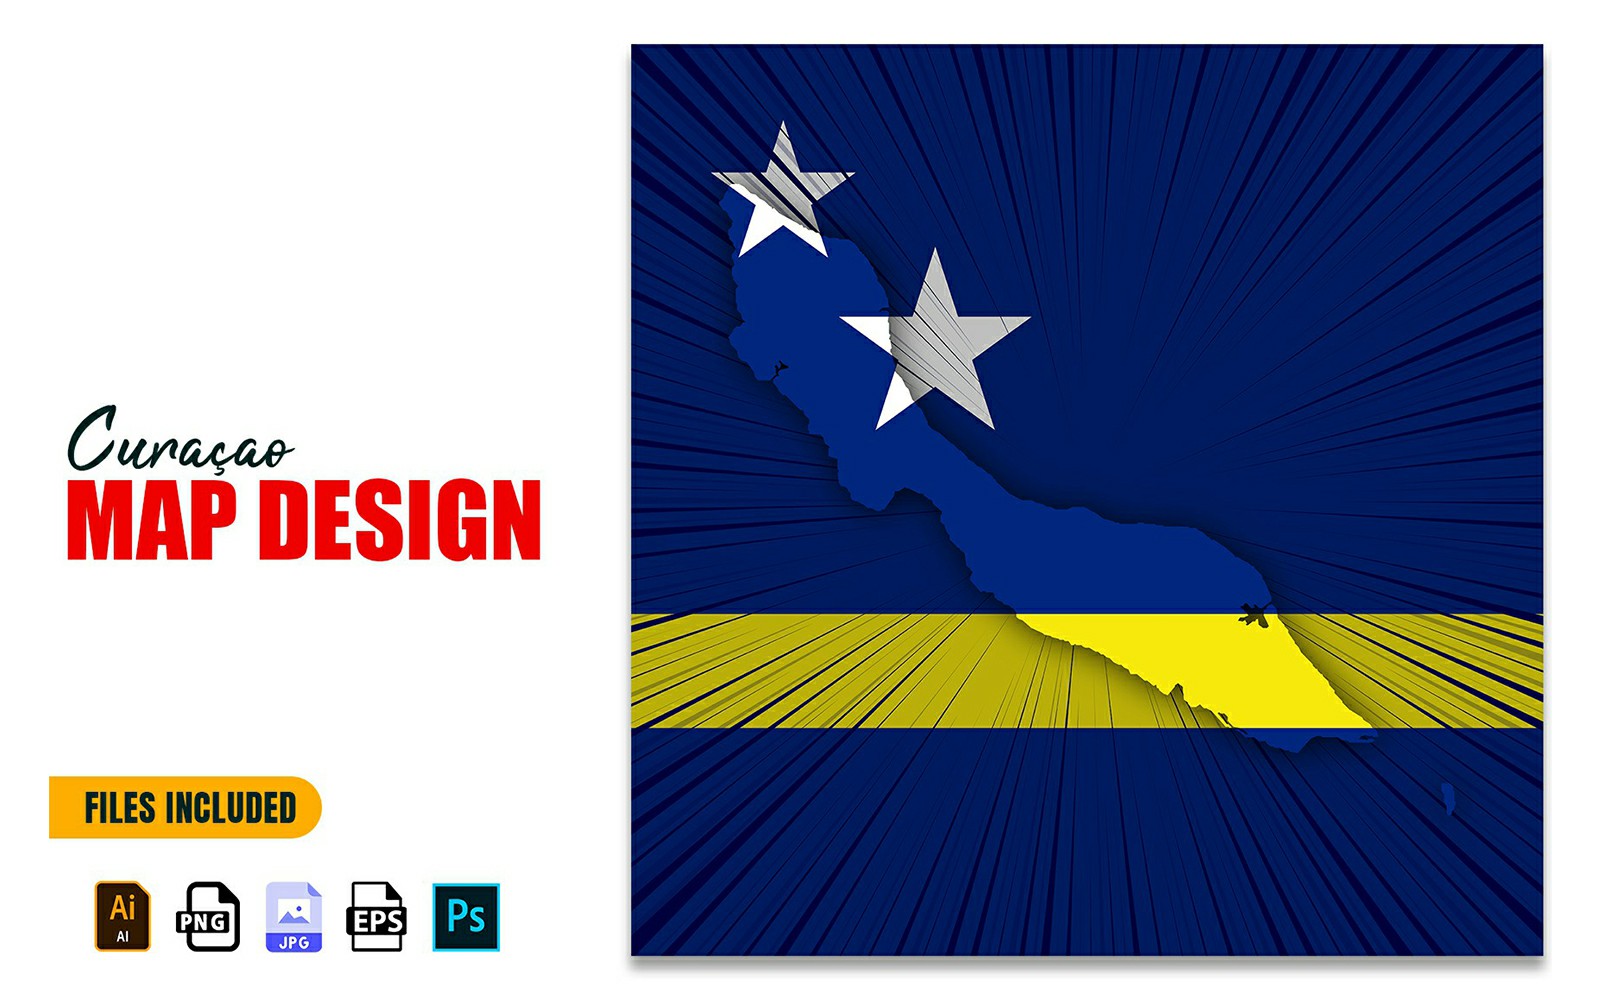 Curacao Independence Day Map Design Illustration